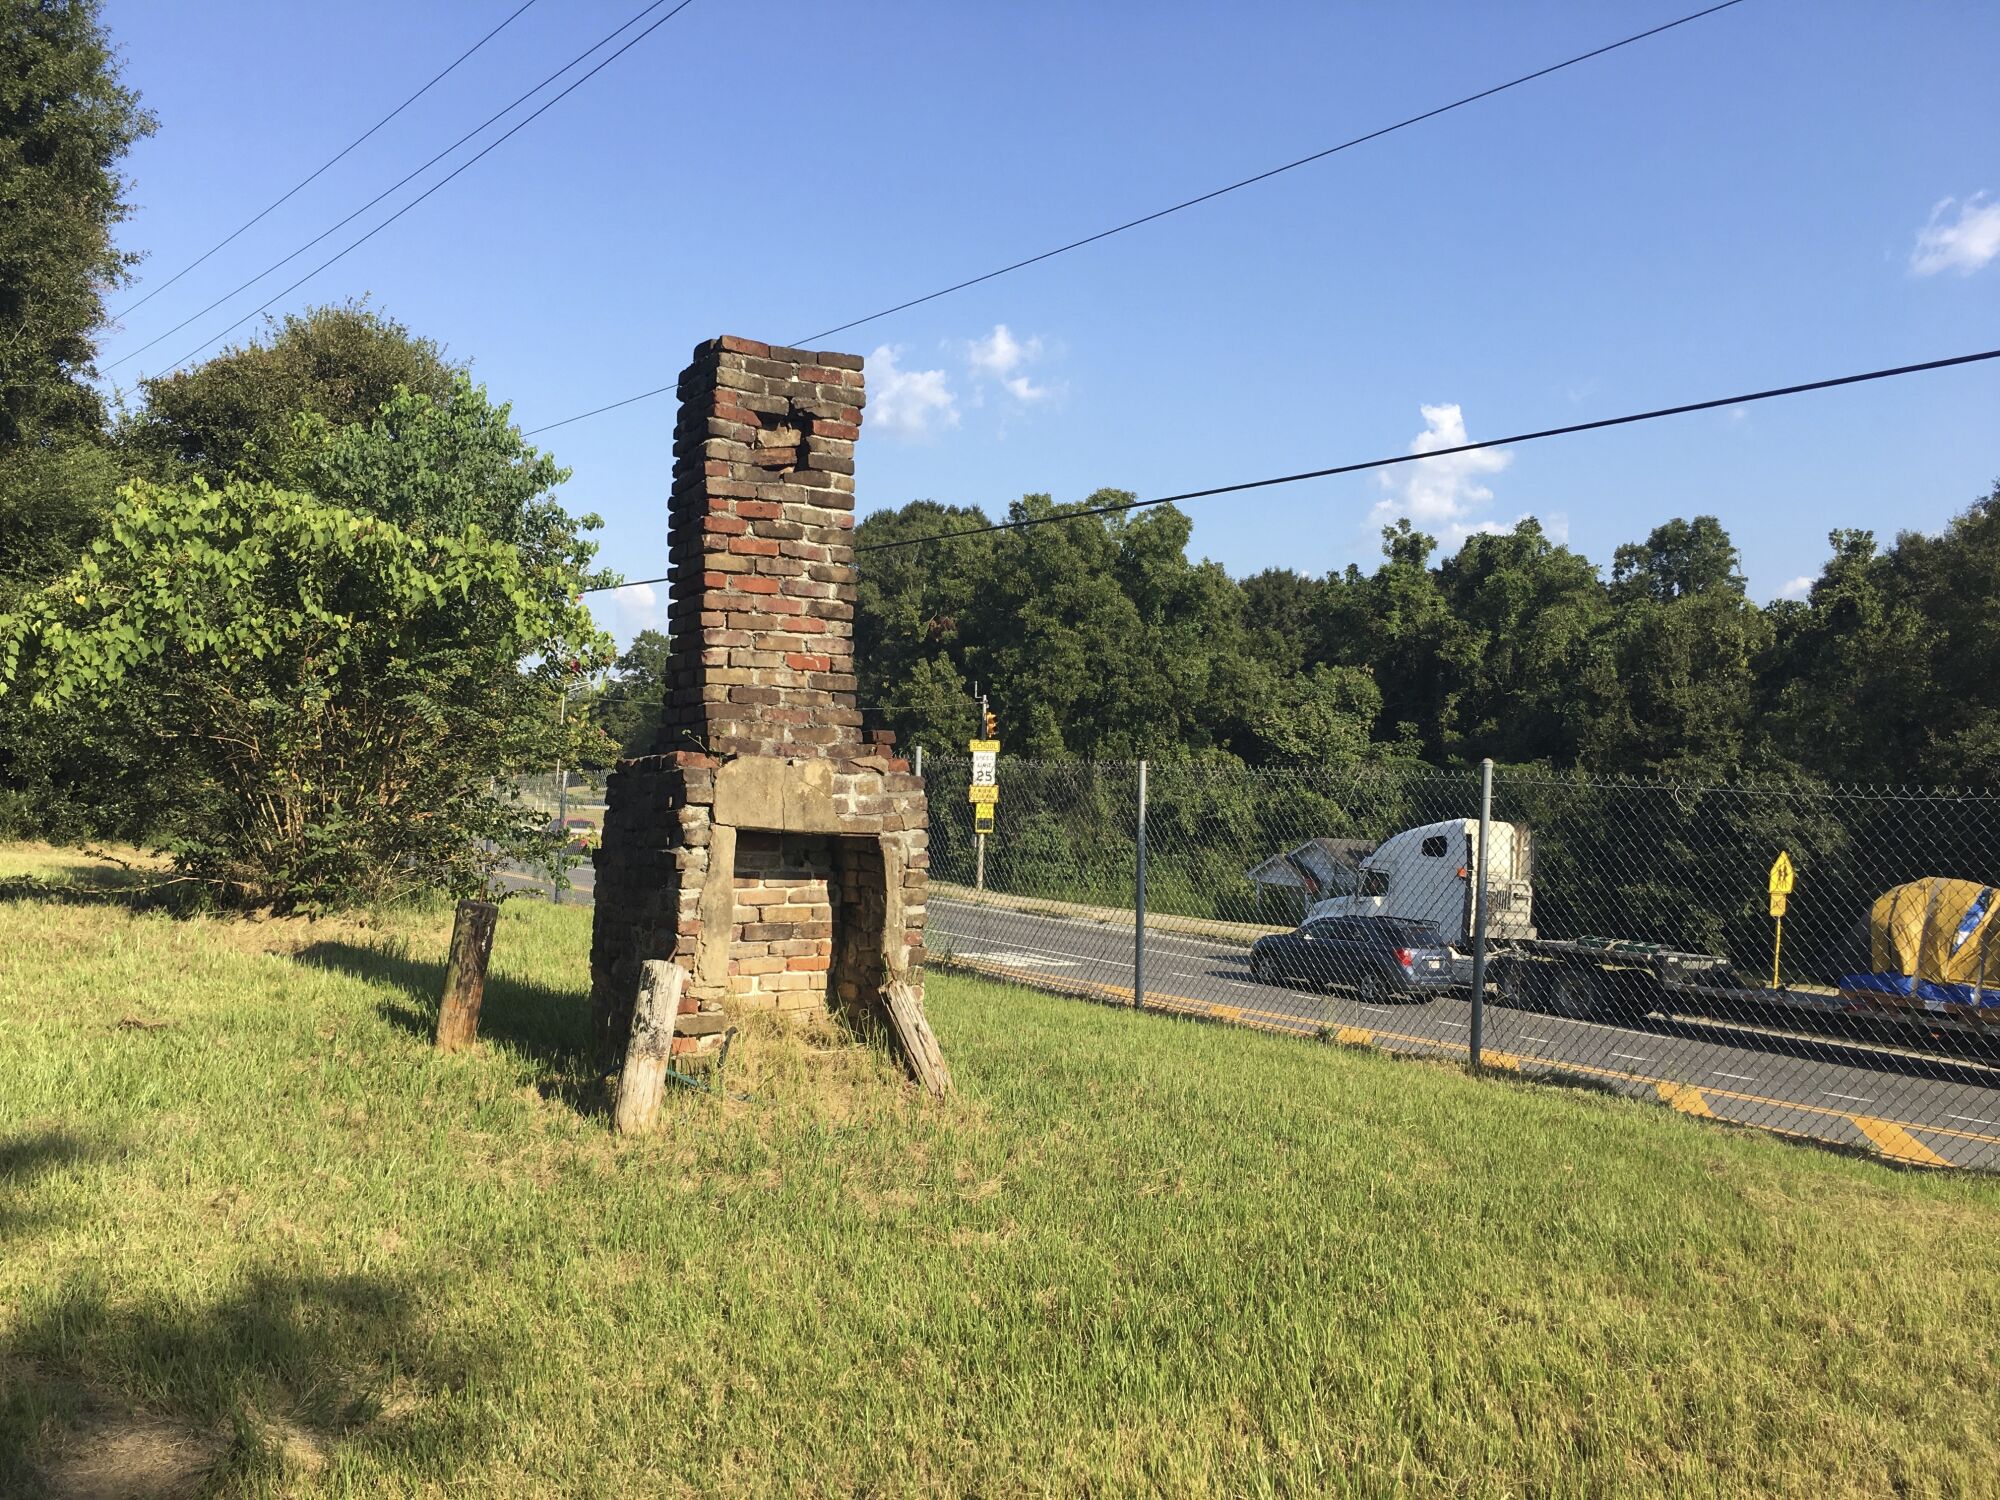 A chimney is all that remains of the original Africatown, built by formerly enslaved settlers from the Clotilda.